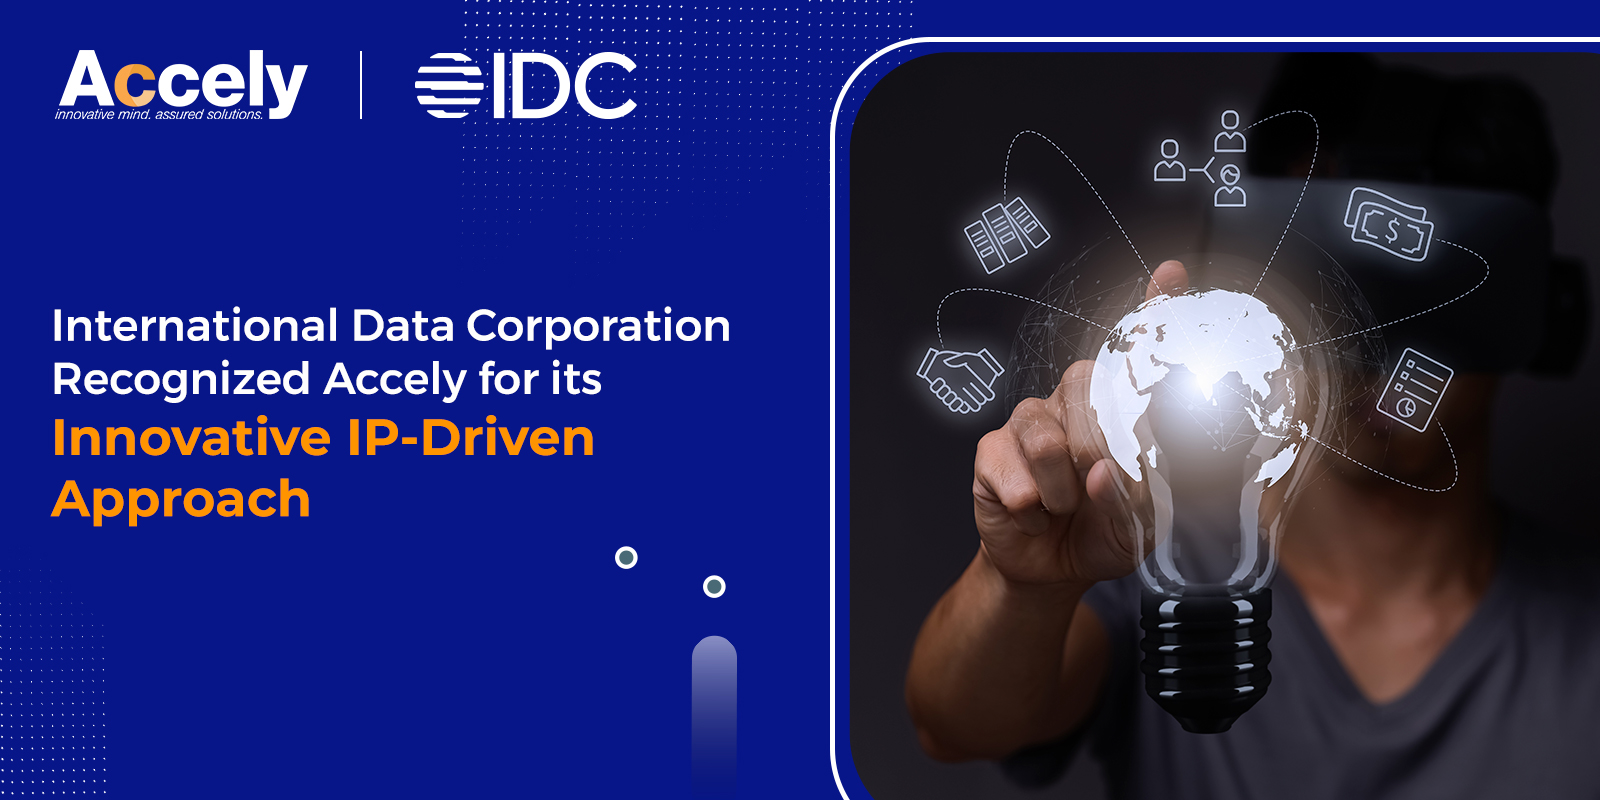 IDC Recognized Accely for its Innovative IP-Driven Approach